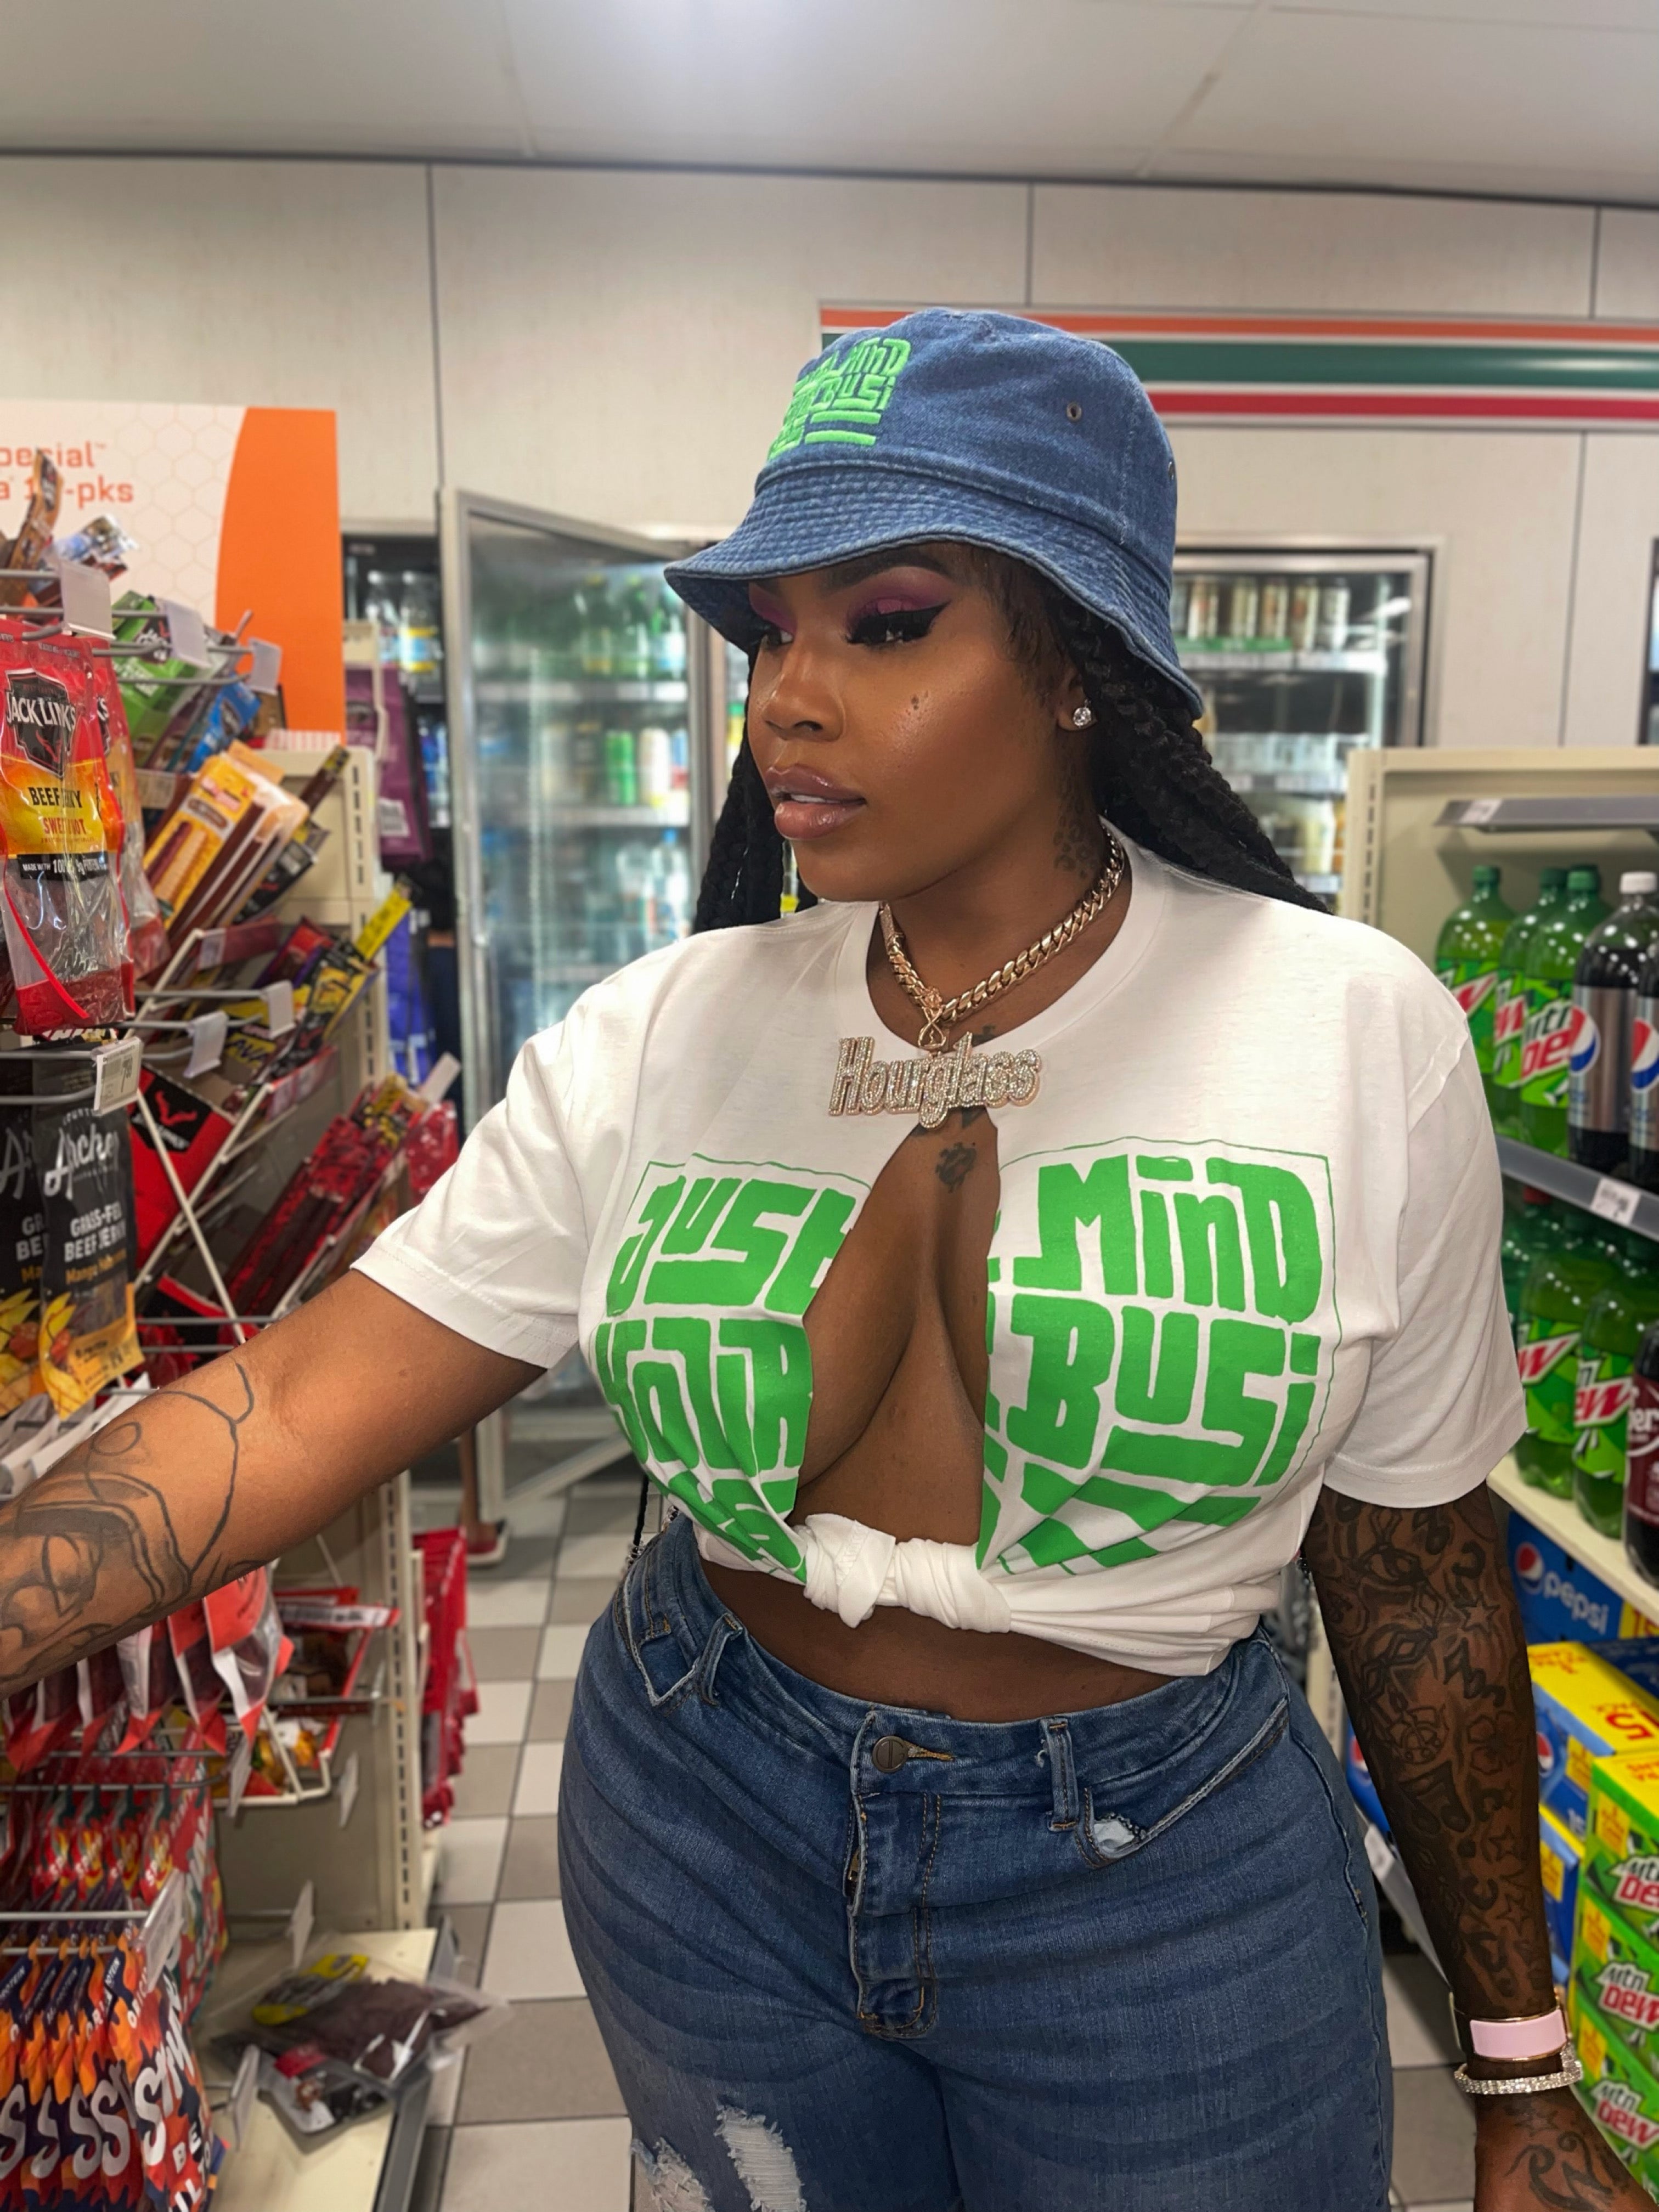 Green just mind your business tee